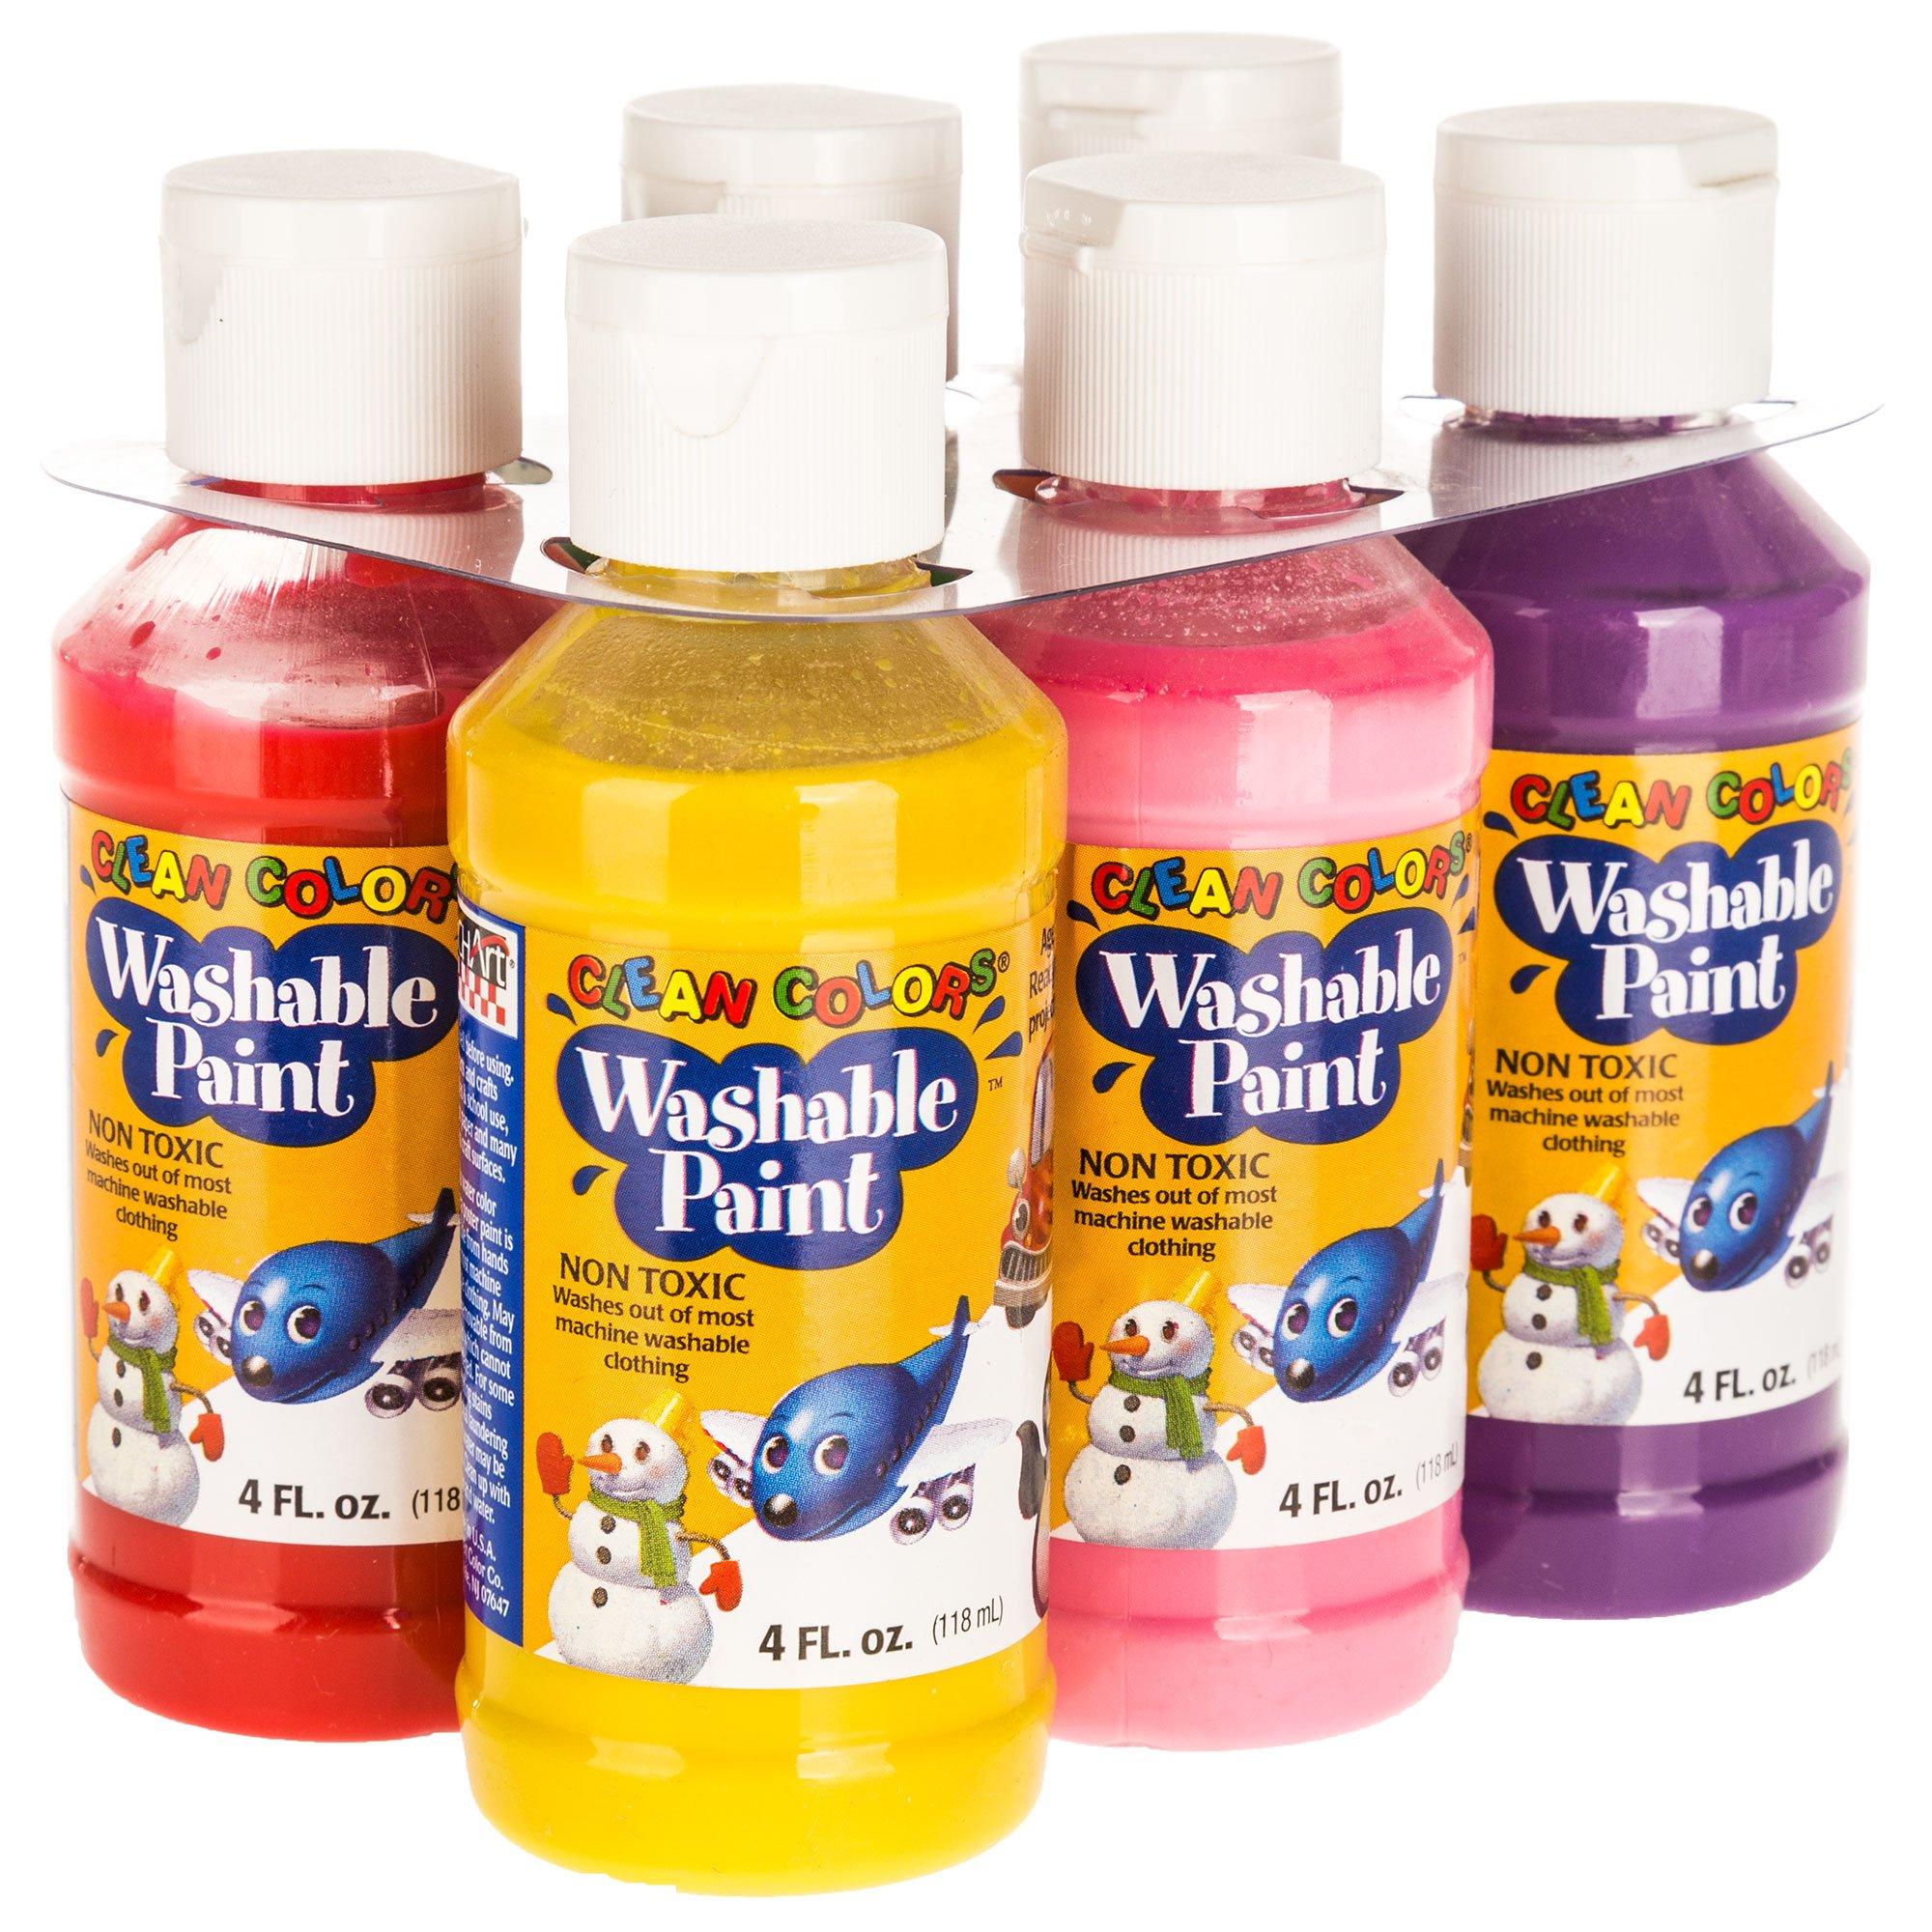 Hello Hobby Brand Washable Tempera Paint For Kids Arts and Crafts